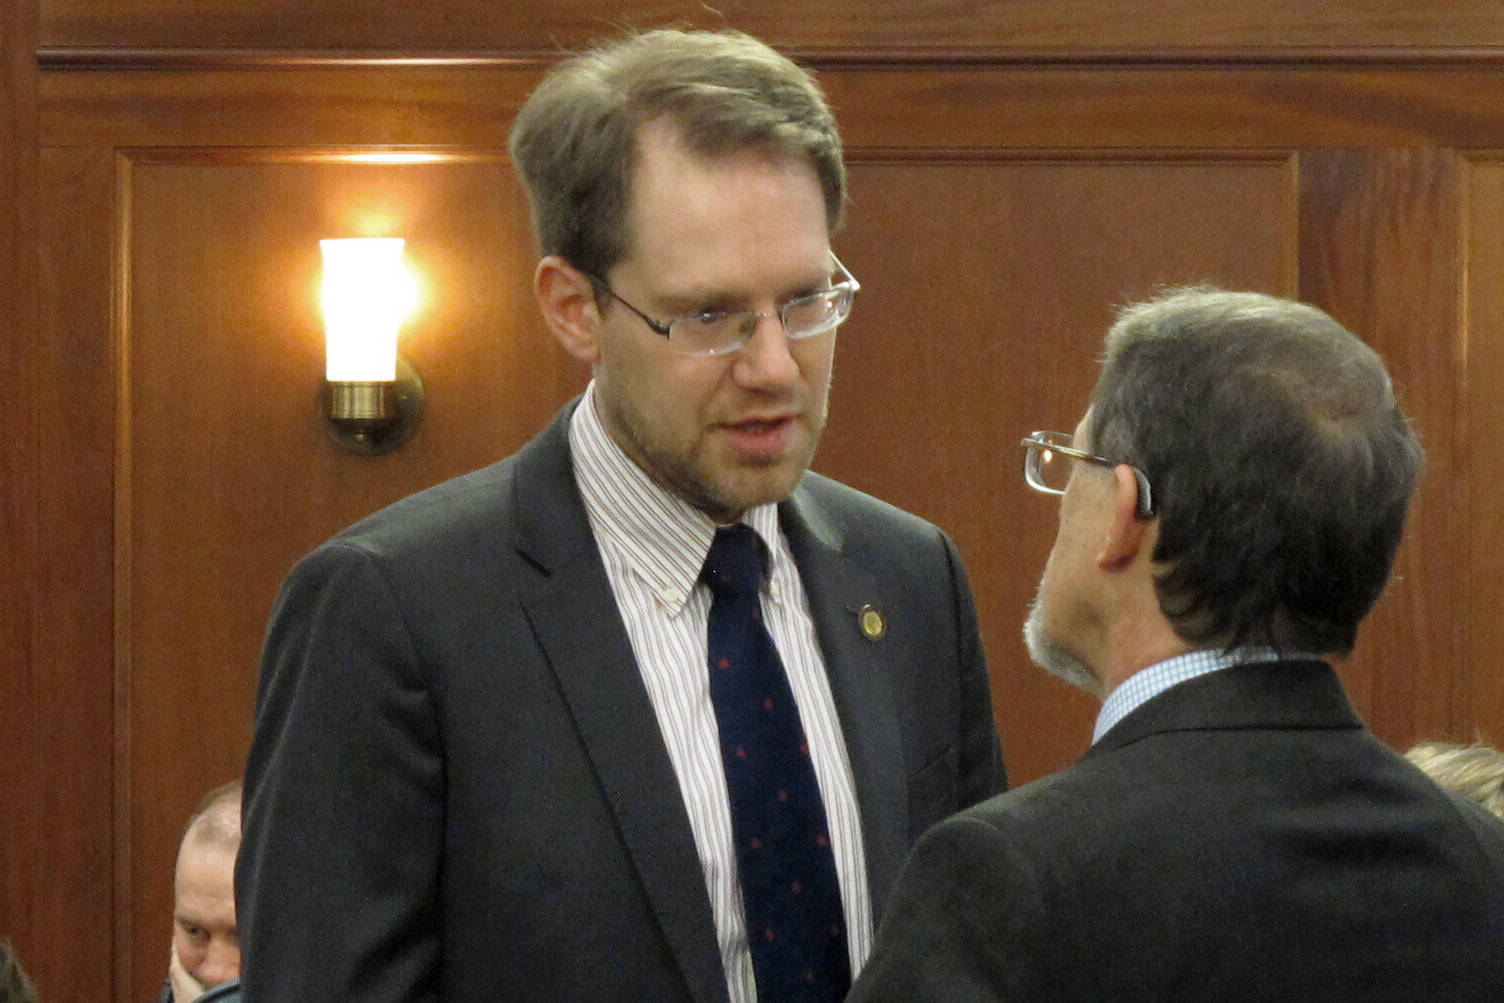 Alaska Republican House Minority Leader Lance Pruitt, left, speaks with Rep. George Rauscher on the floor of the House in March 2020. A recount found Pruitt lost his Anchorage seat to Democrat Liz Snyder by 11 votes. Pruitt's attorney says the court should order a new election, arguing that election officials did not do enough to notify voters of a polling place change. (AP Photo/Becky Bohrer, File)